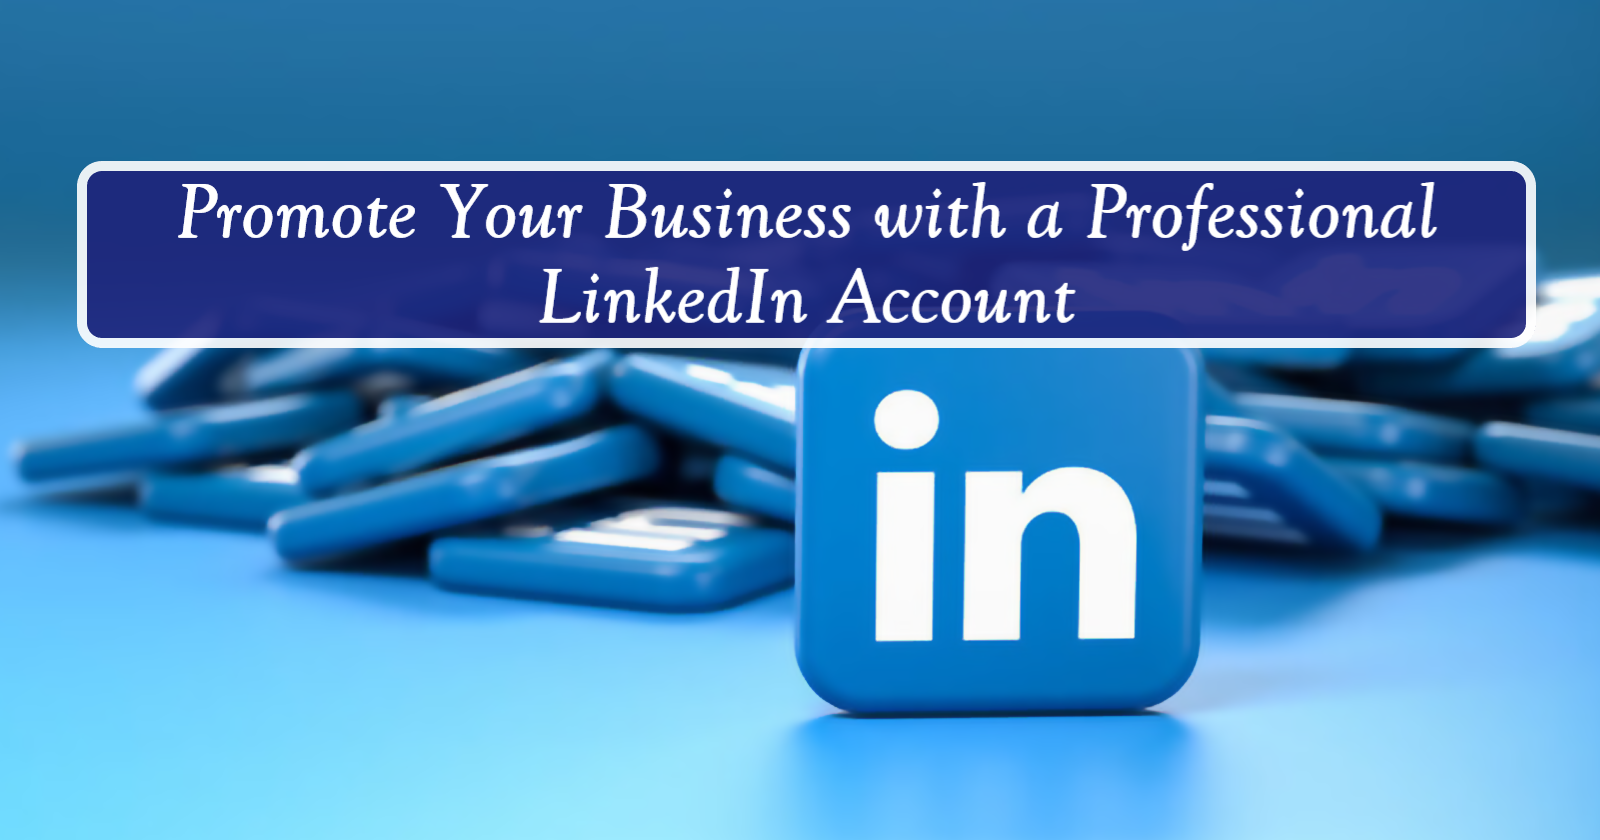 Promote Your Business with a Professional LinkedIn Account